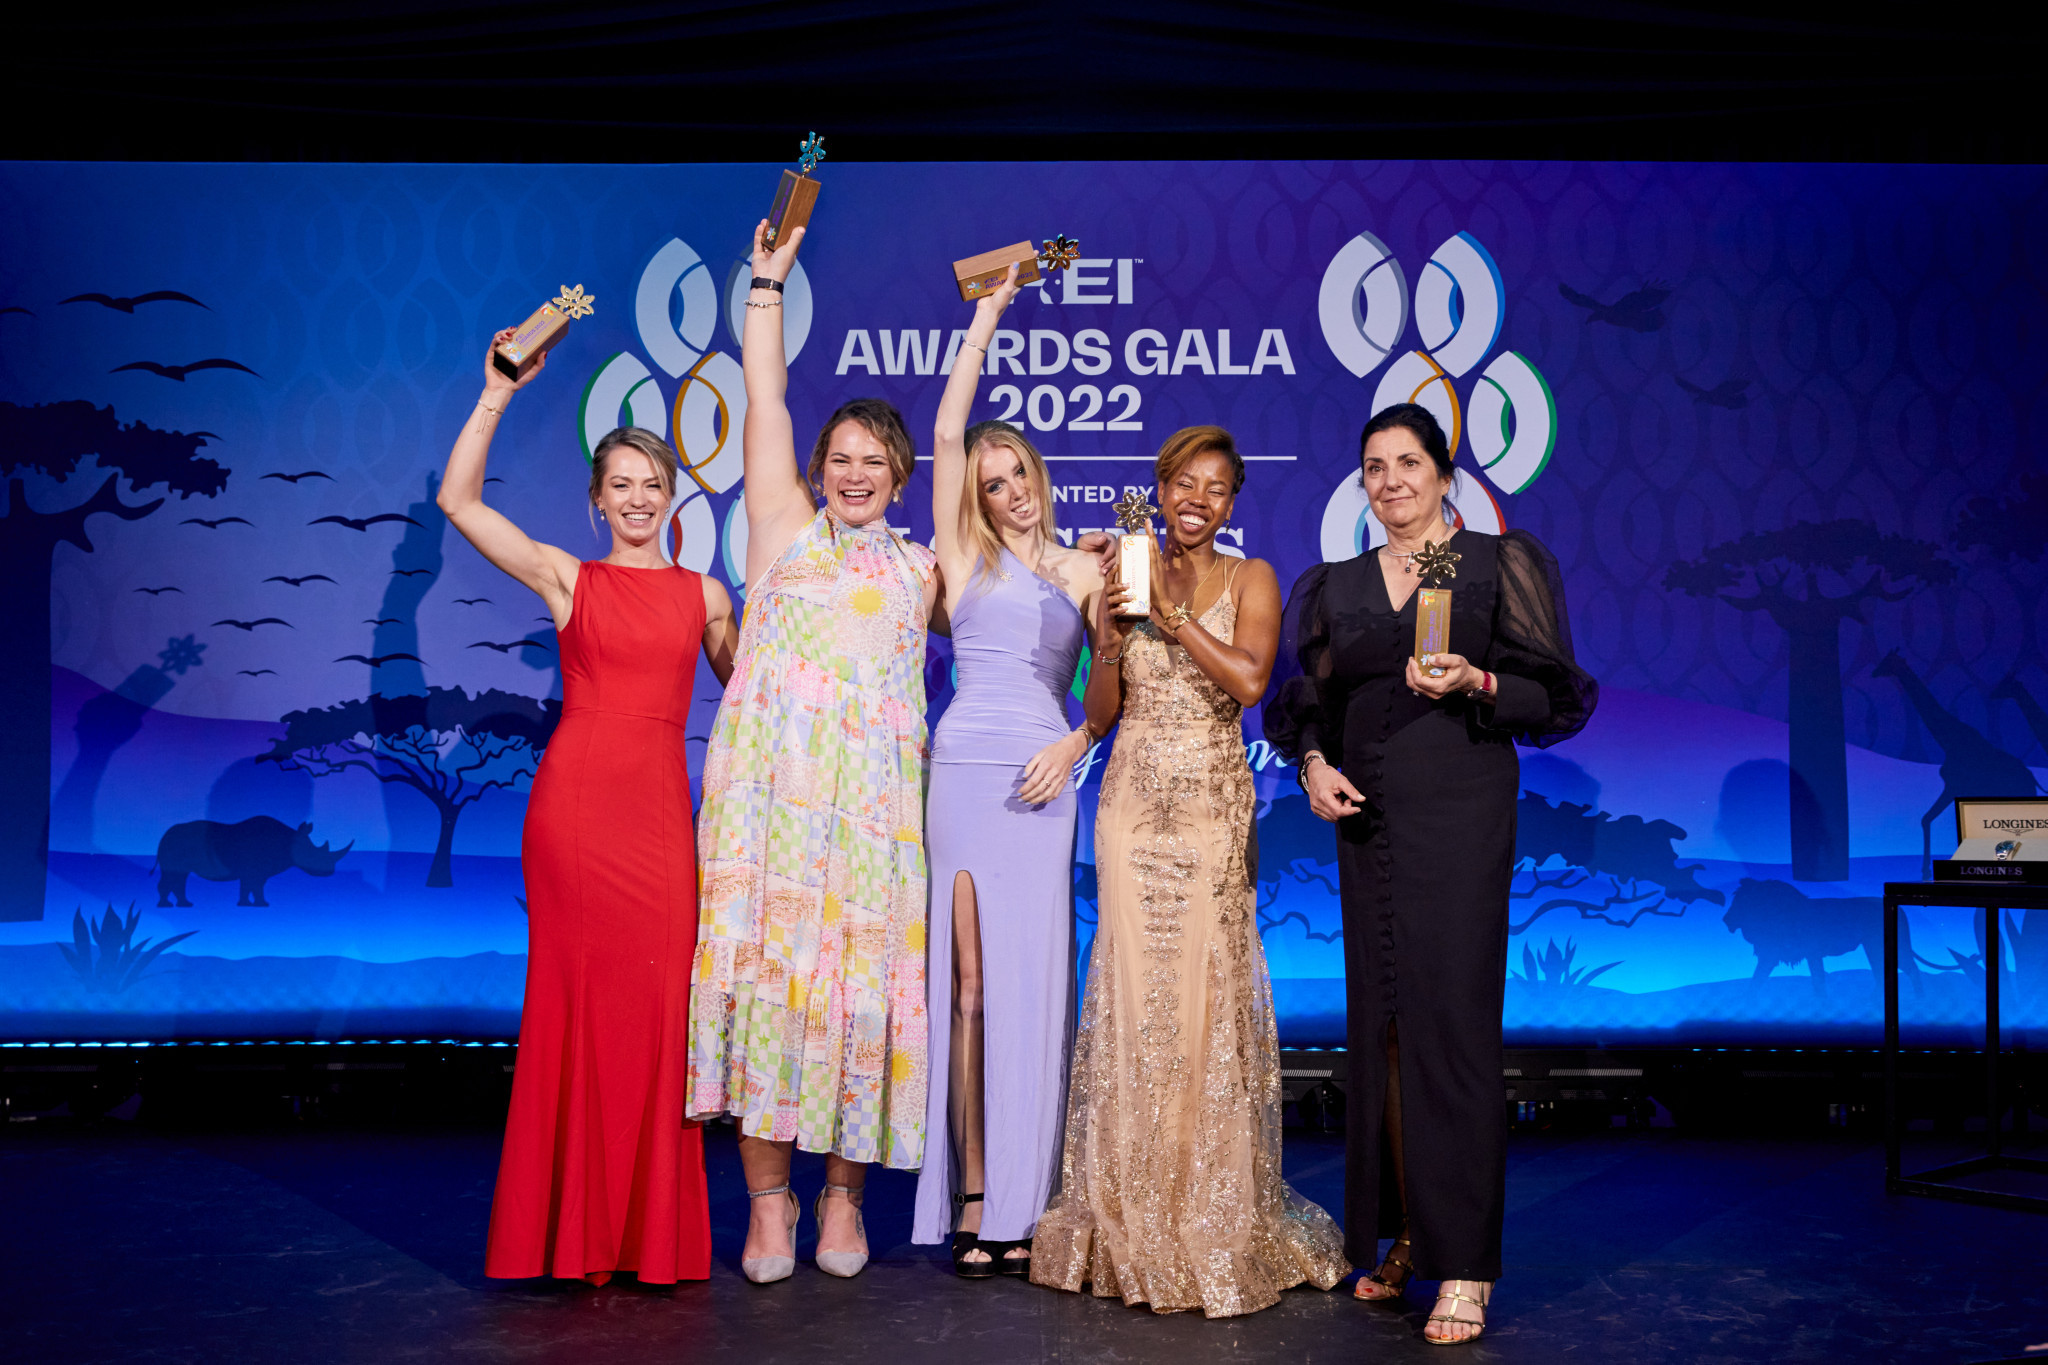 All of the winners of this year's FEI Awards were female ©FEI